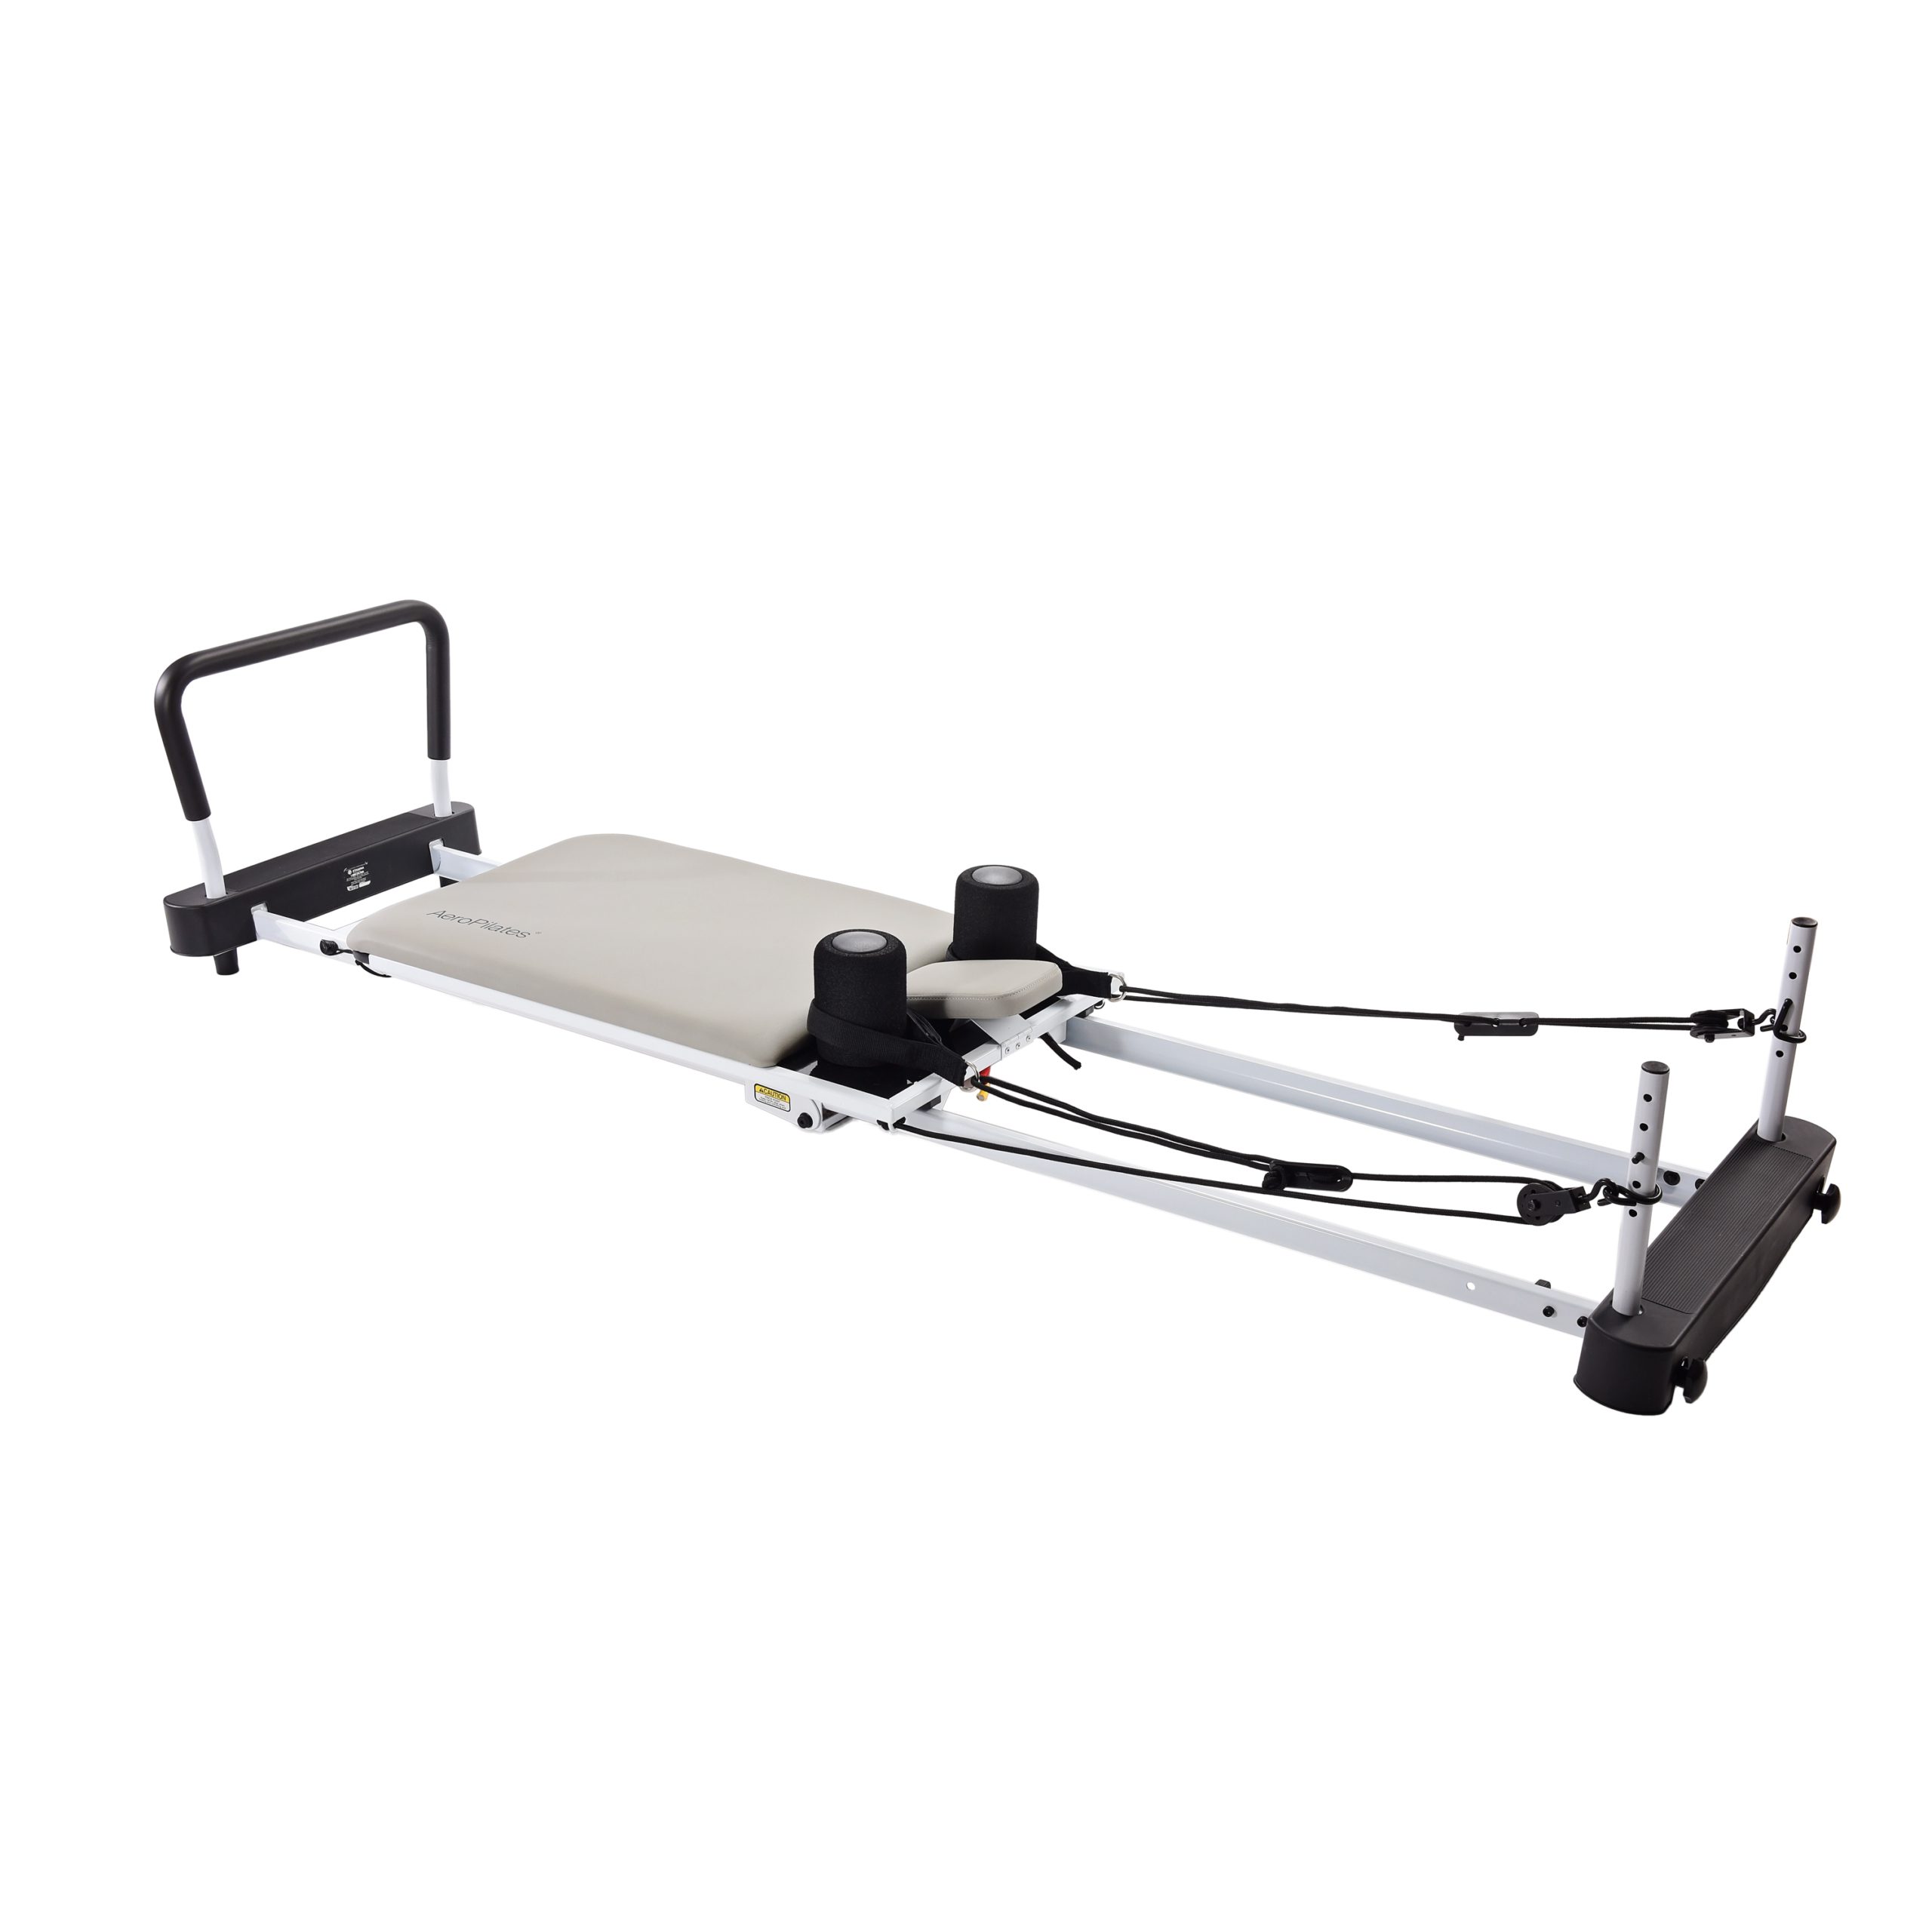 AeroPilates Reformer Plus 5 Cord w/ DVD's Pull Up Bar and